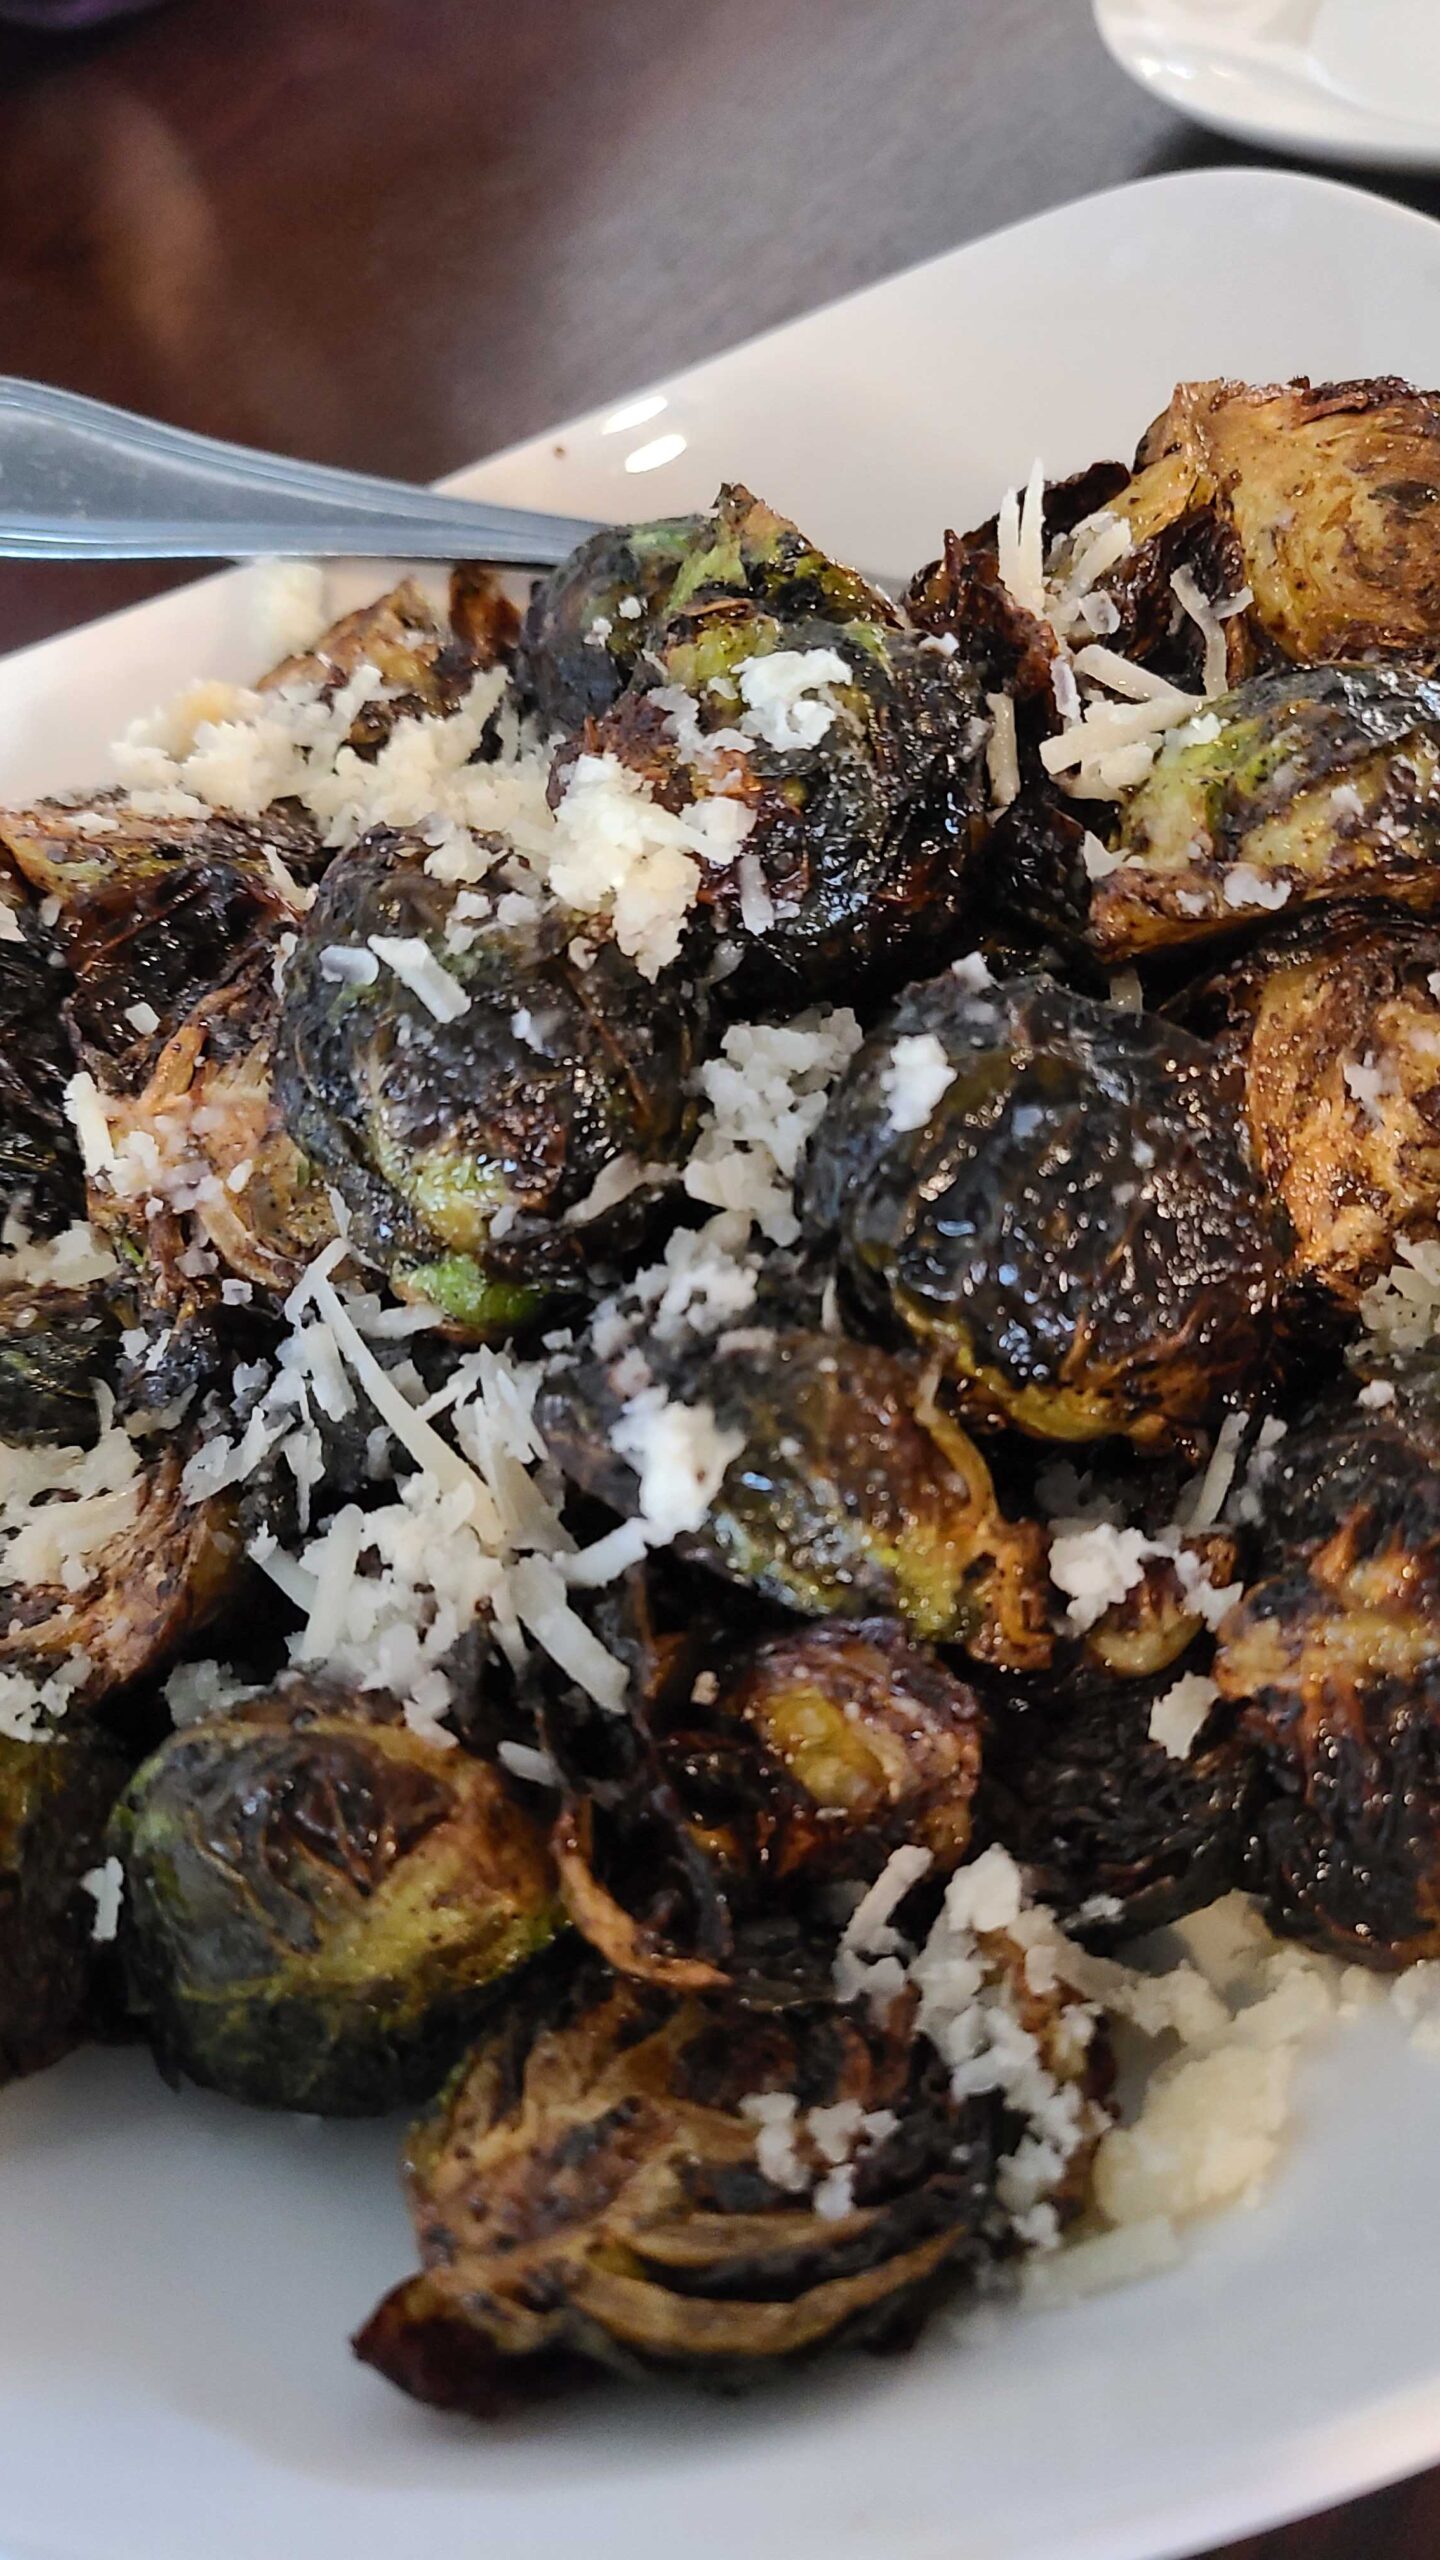 A plate of deep fried brussels sprouts with parmesan cheese